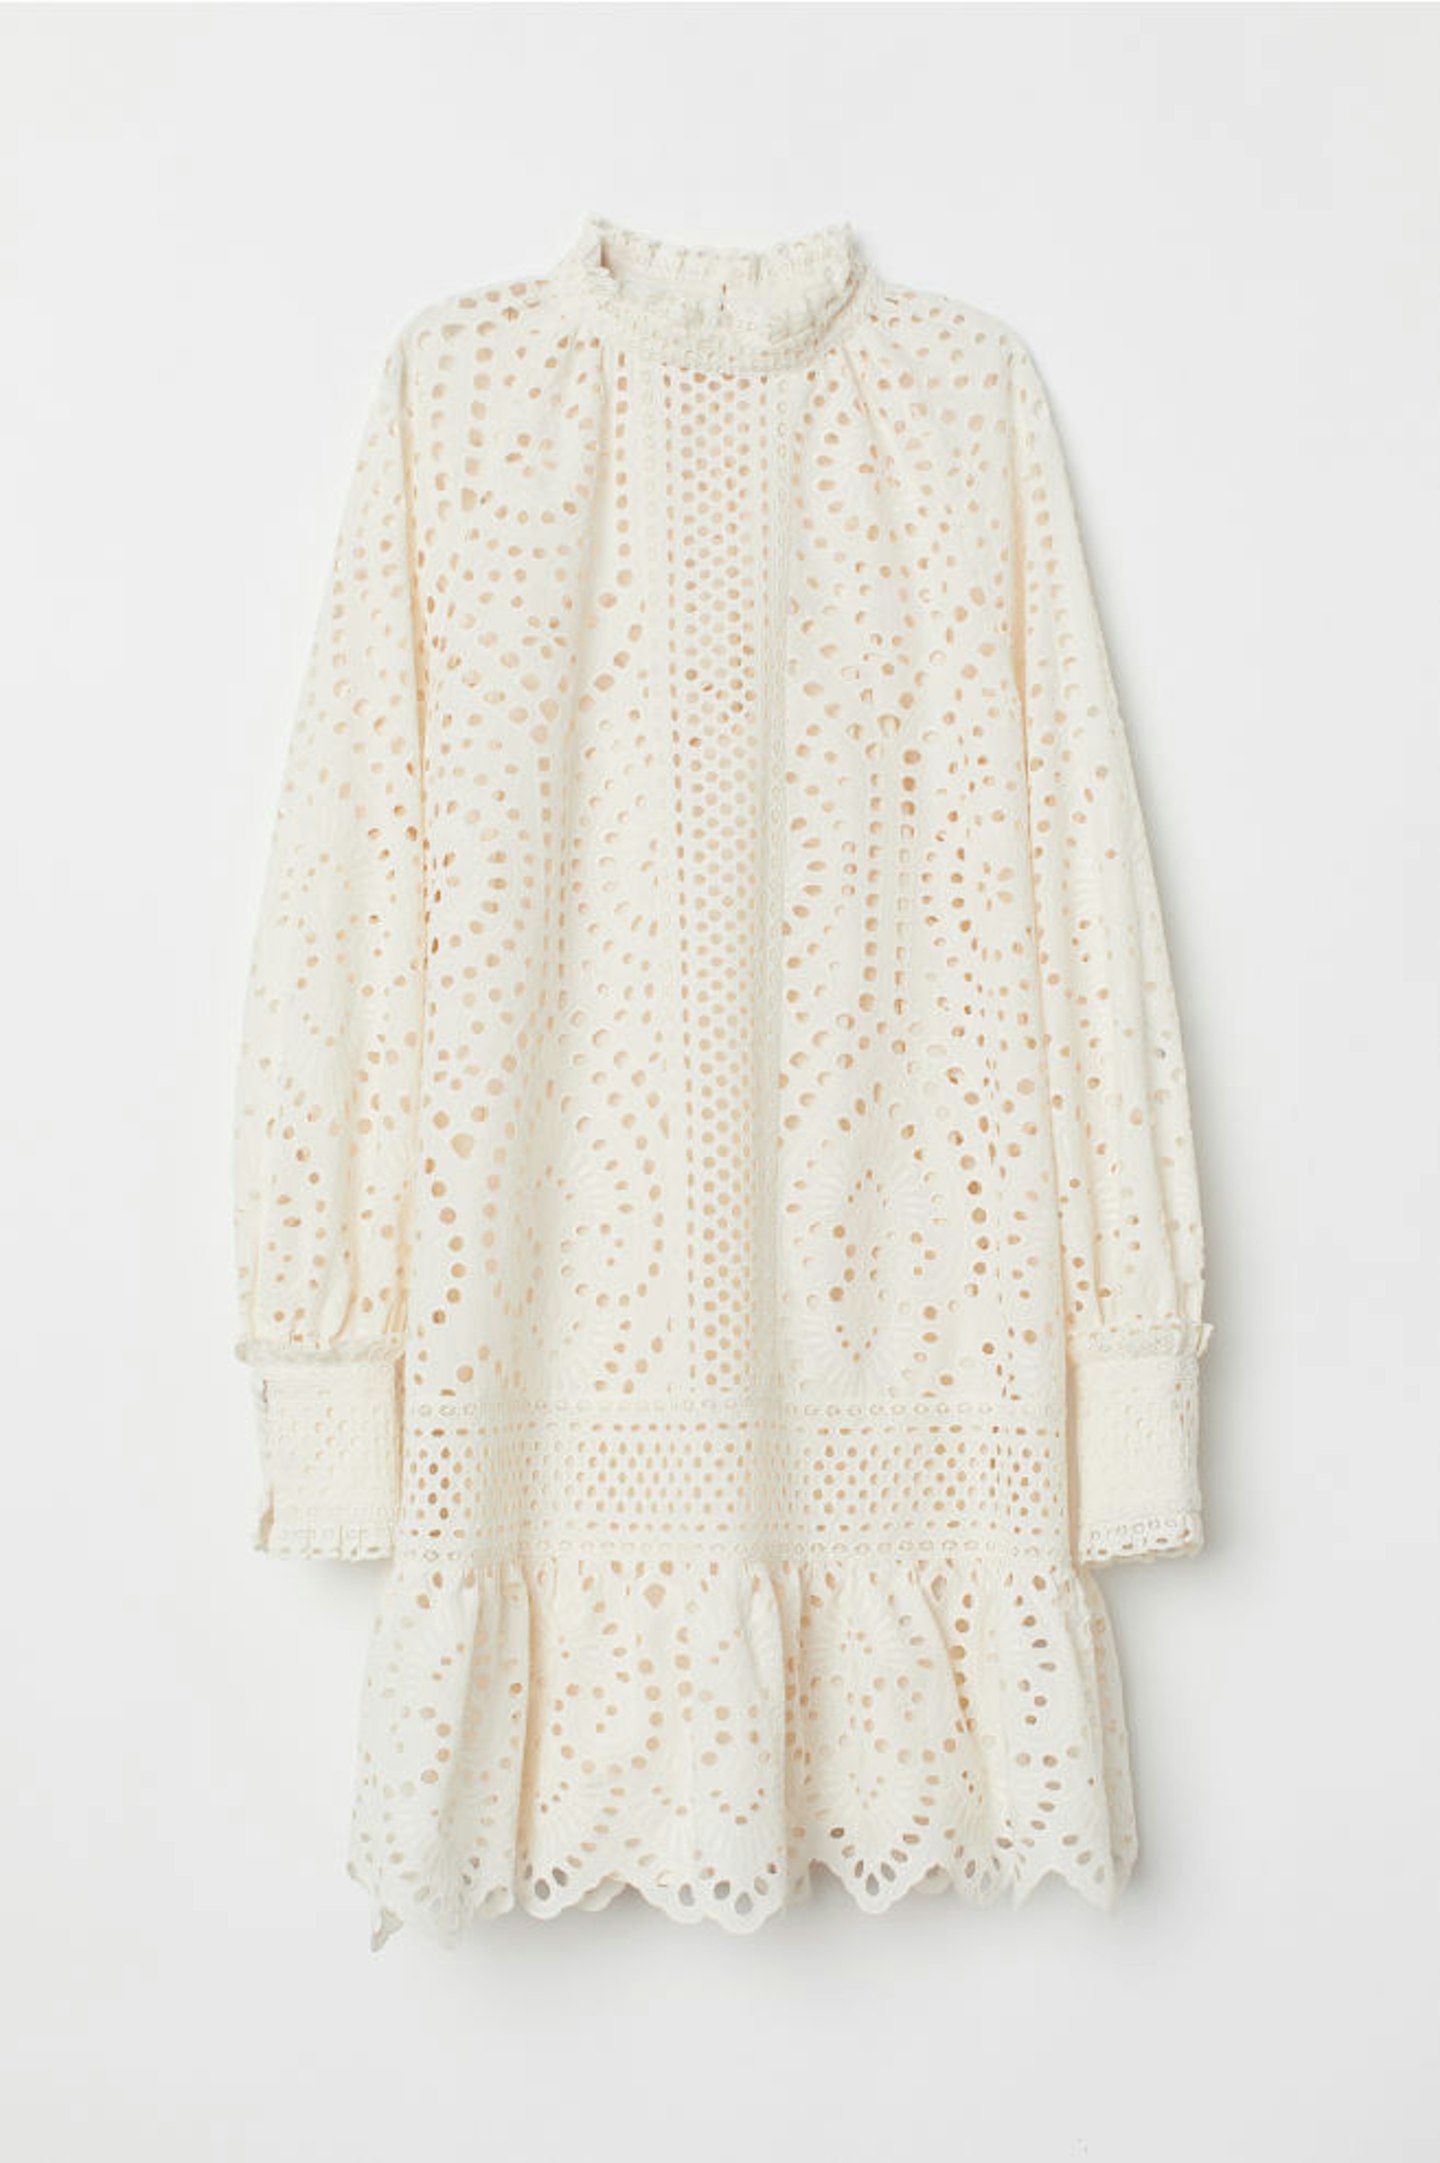 H&M, Broderie Anglaise Tunic, £59.99